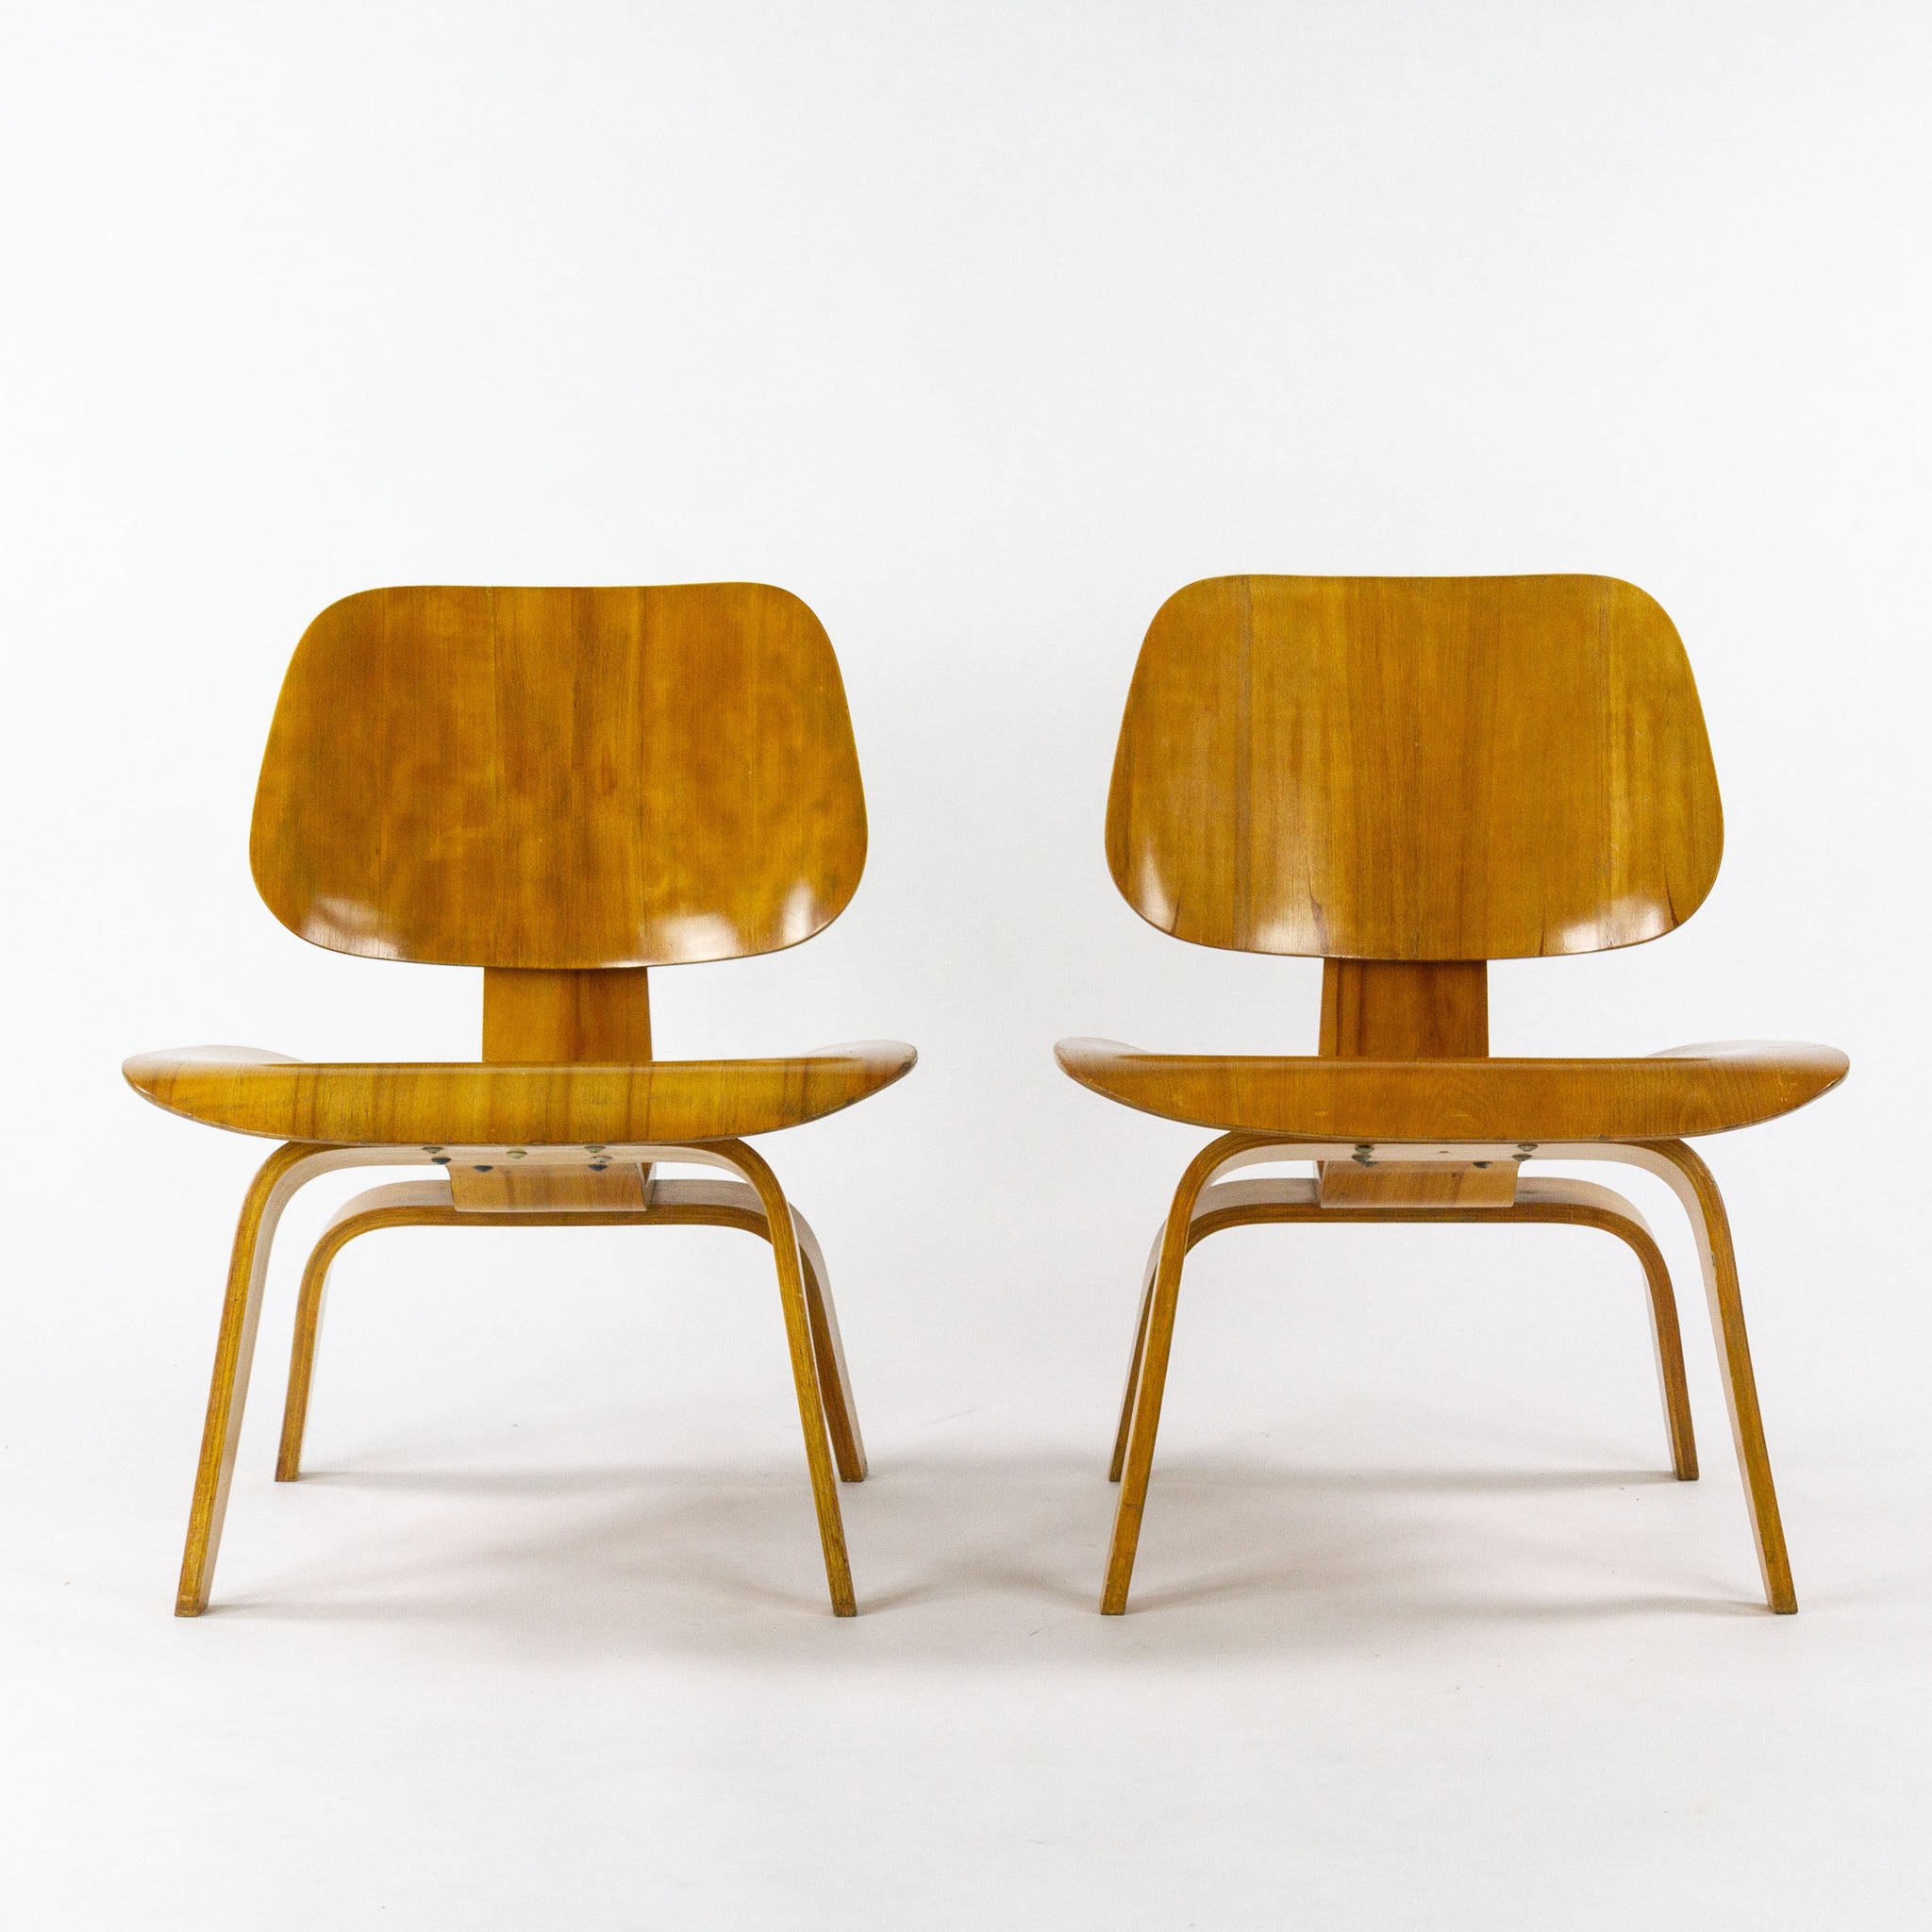 SOLD 1950 Pair of Eames Evans Herman Miller LCW Lounge Chair Wood in Calico Ash Wood